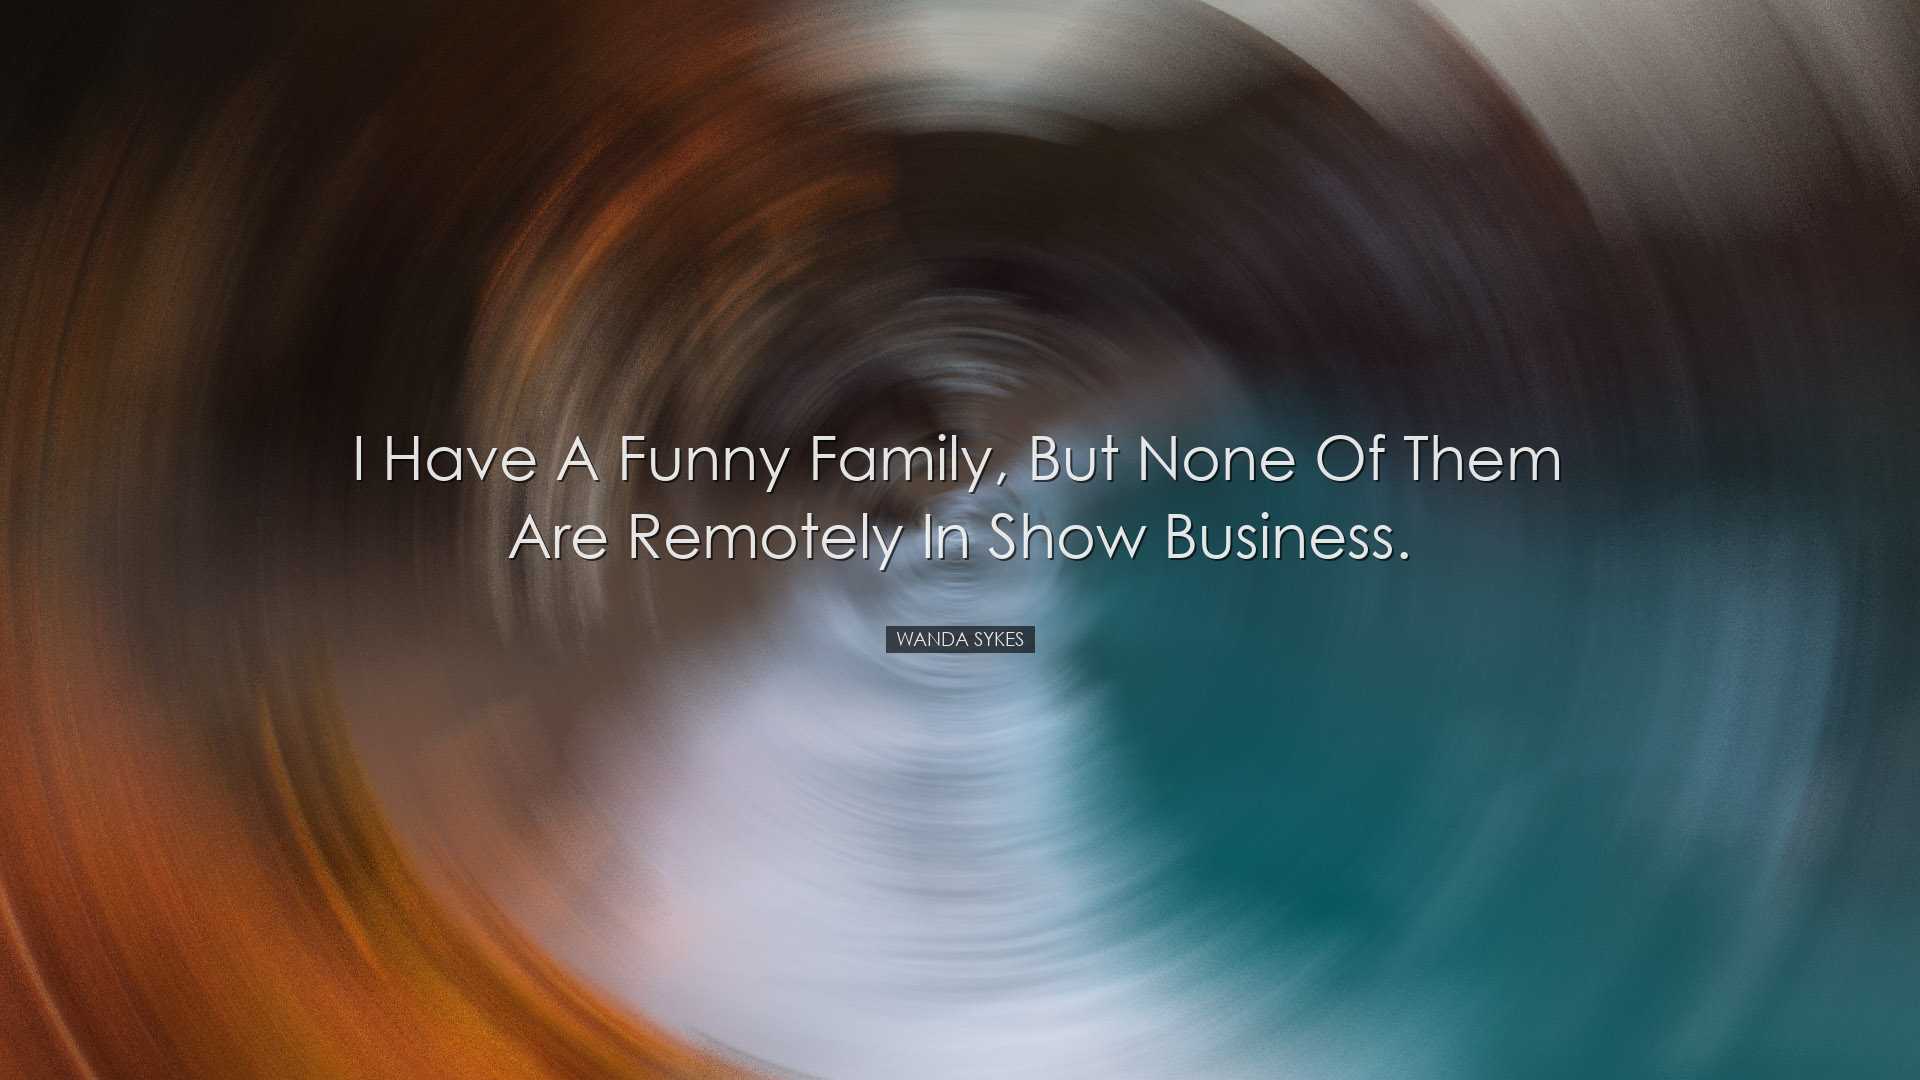 I have a funny family, but none of them are remotely in show busin